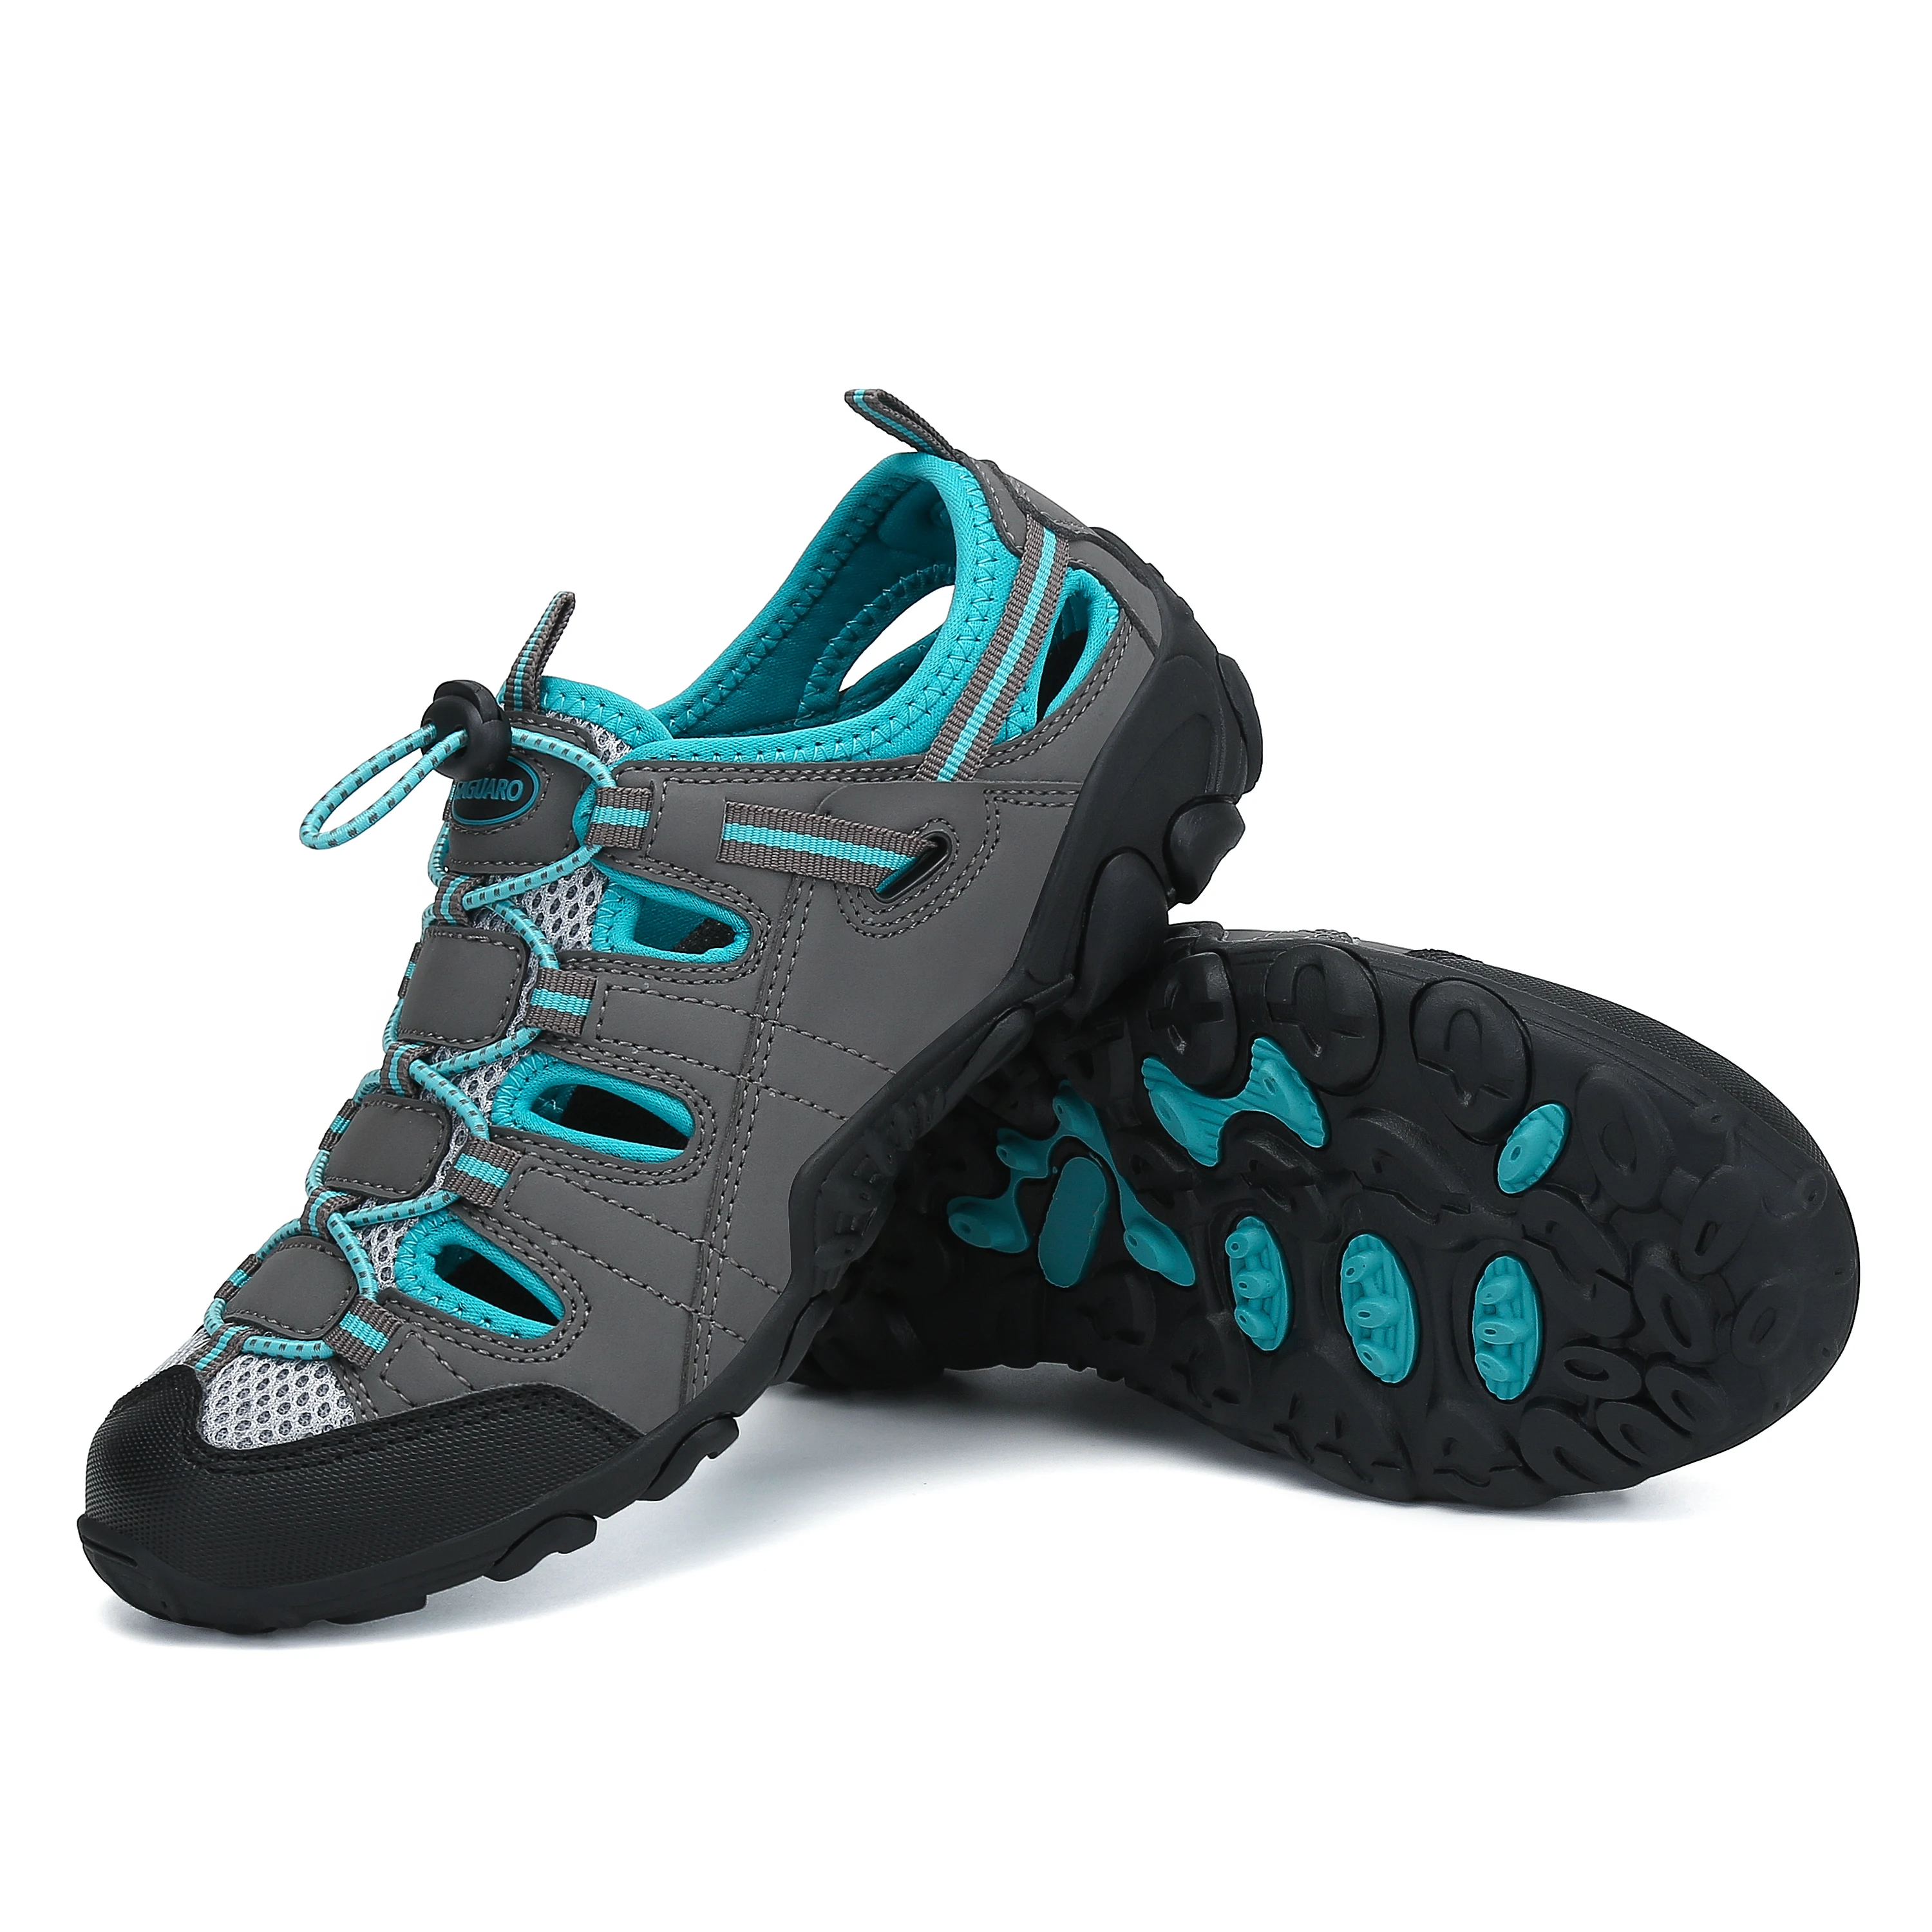 closed toe water hiking shoes